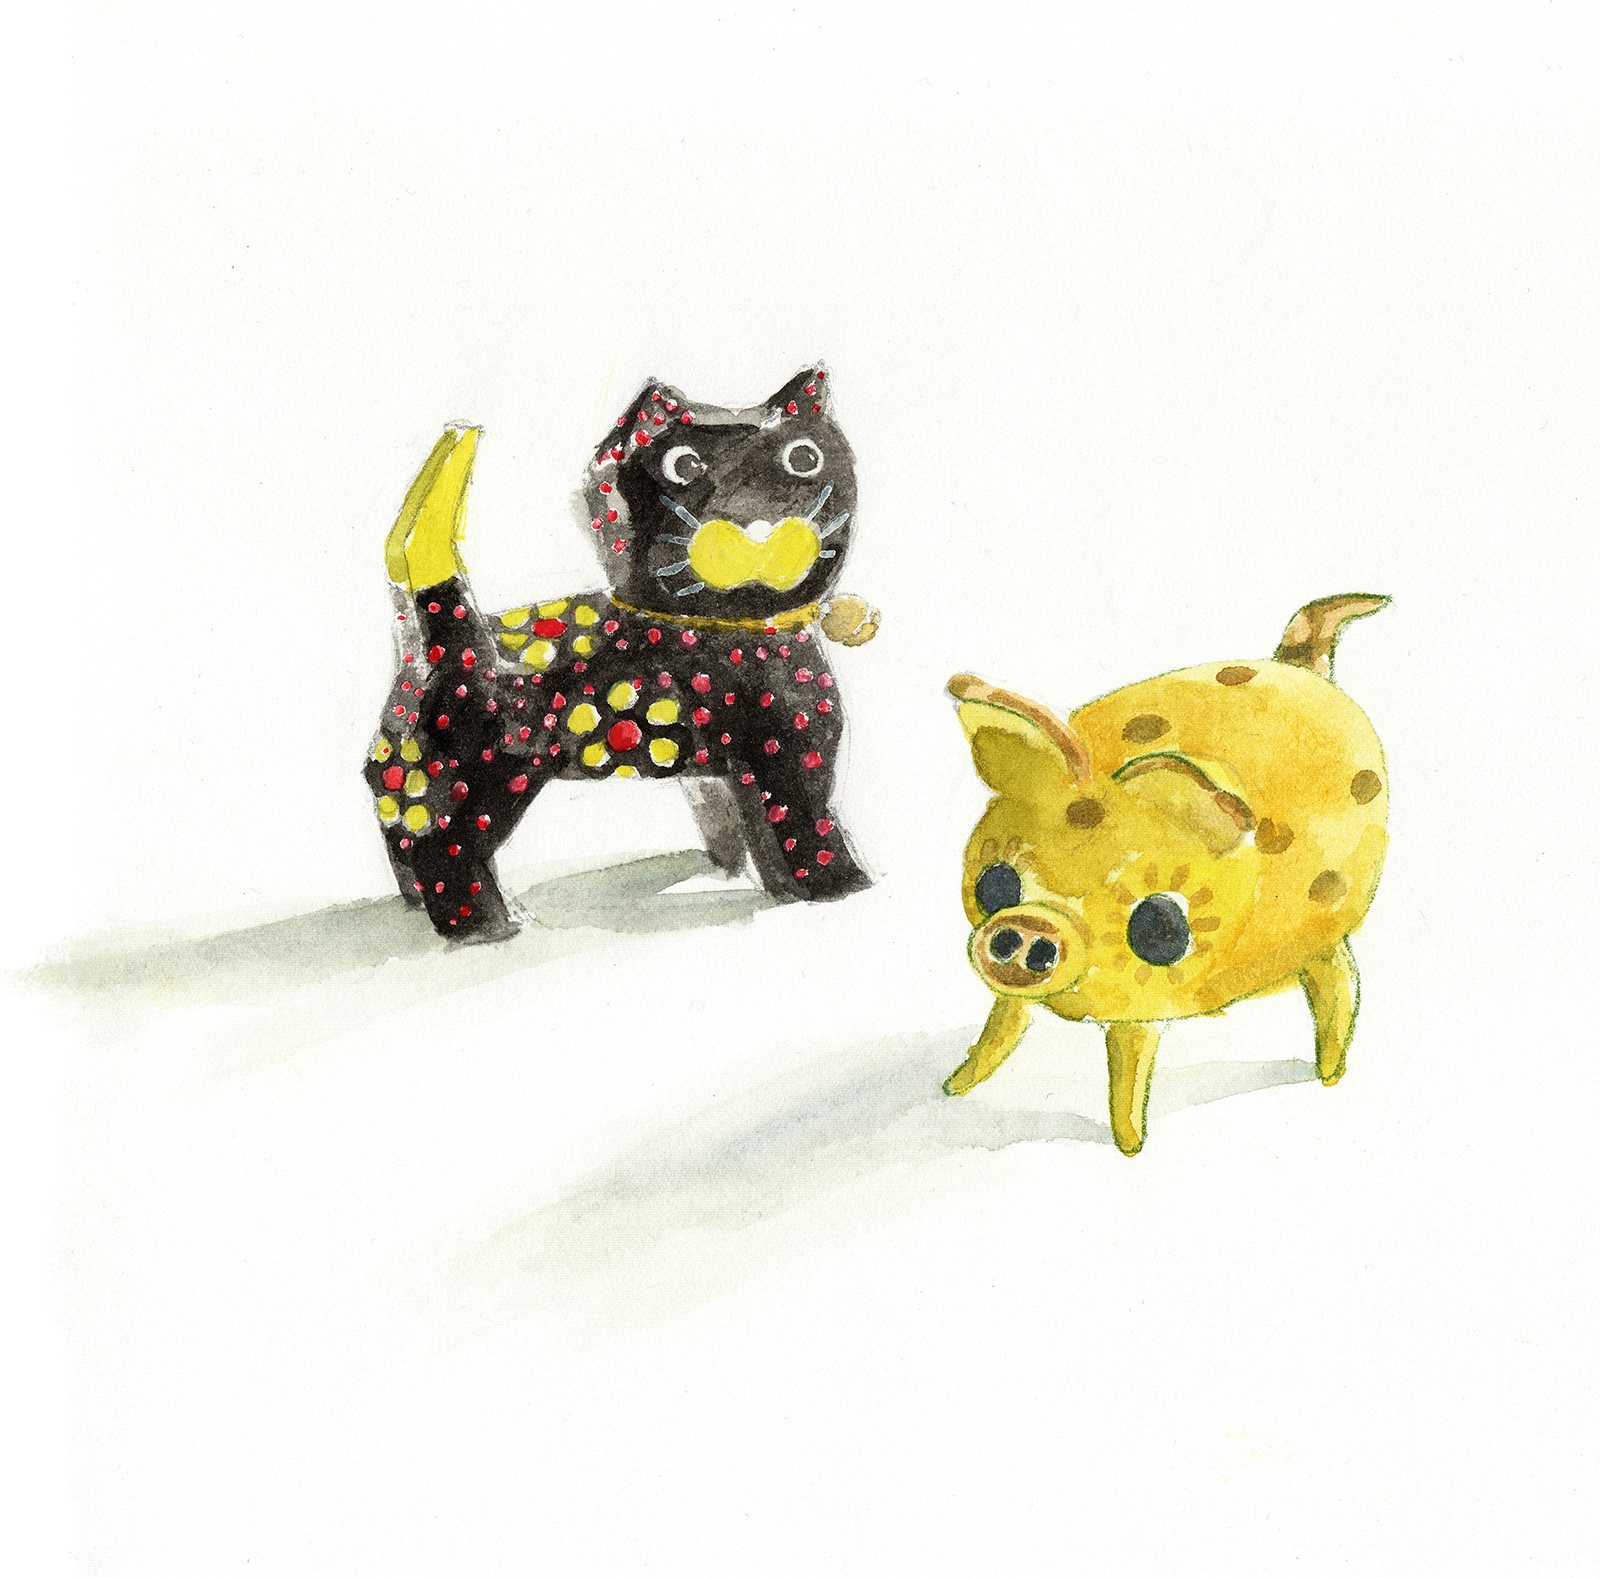 A wooden painted cat beside a small ceramic yellow gold spotted pig